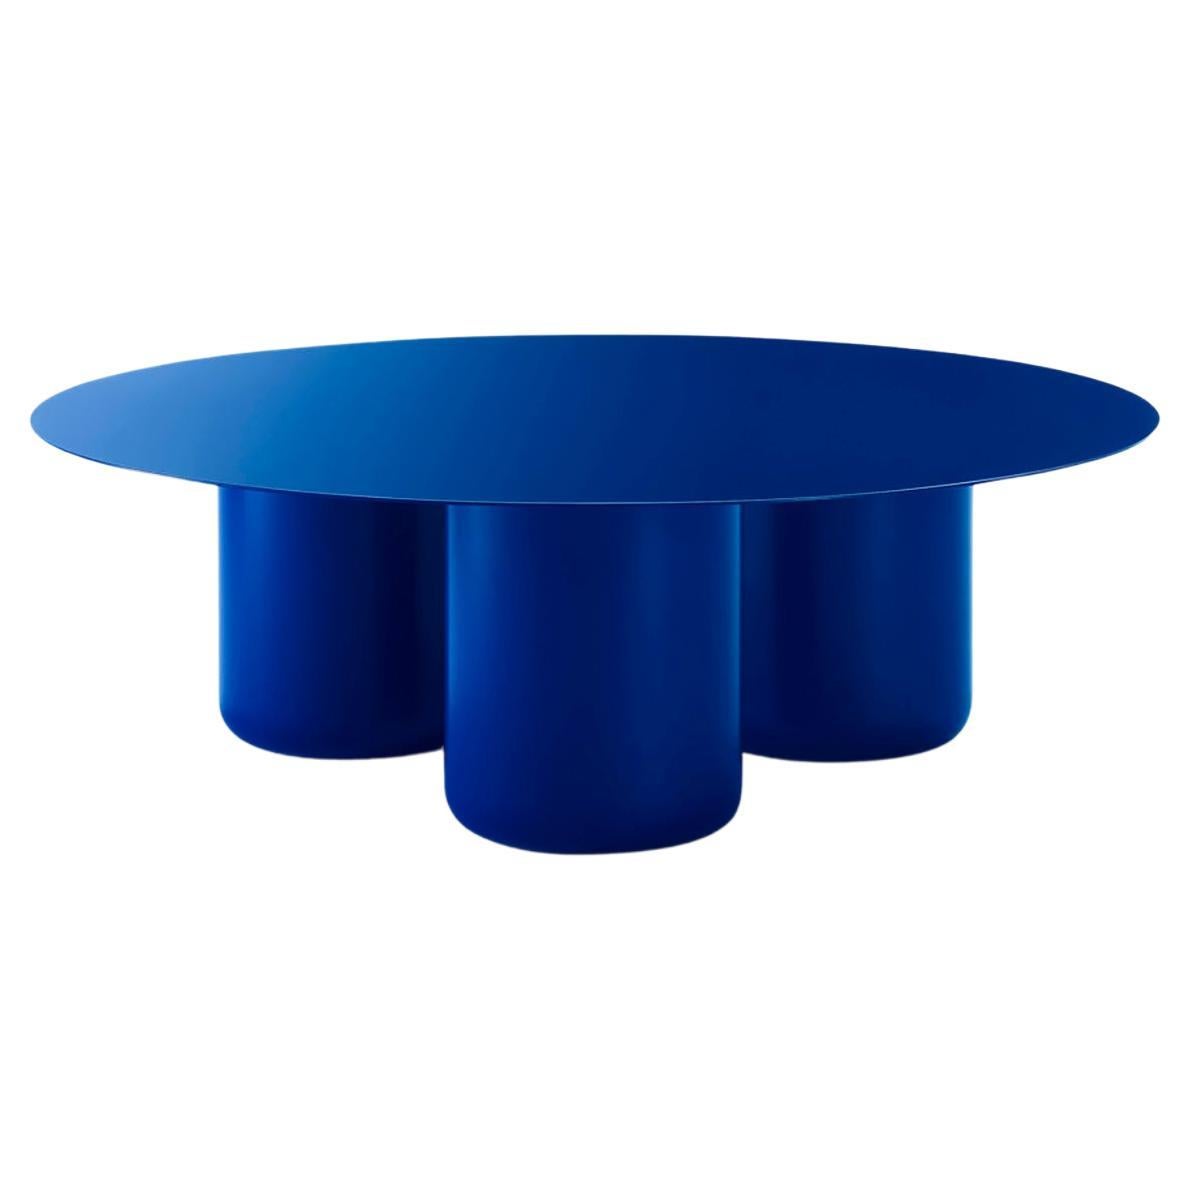 Vivid Blue Round Table by Coco Flip For Sale